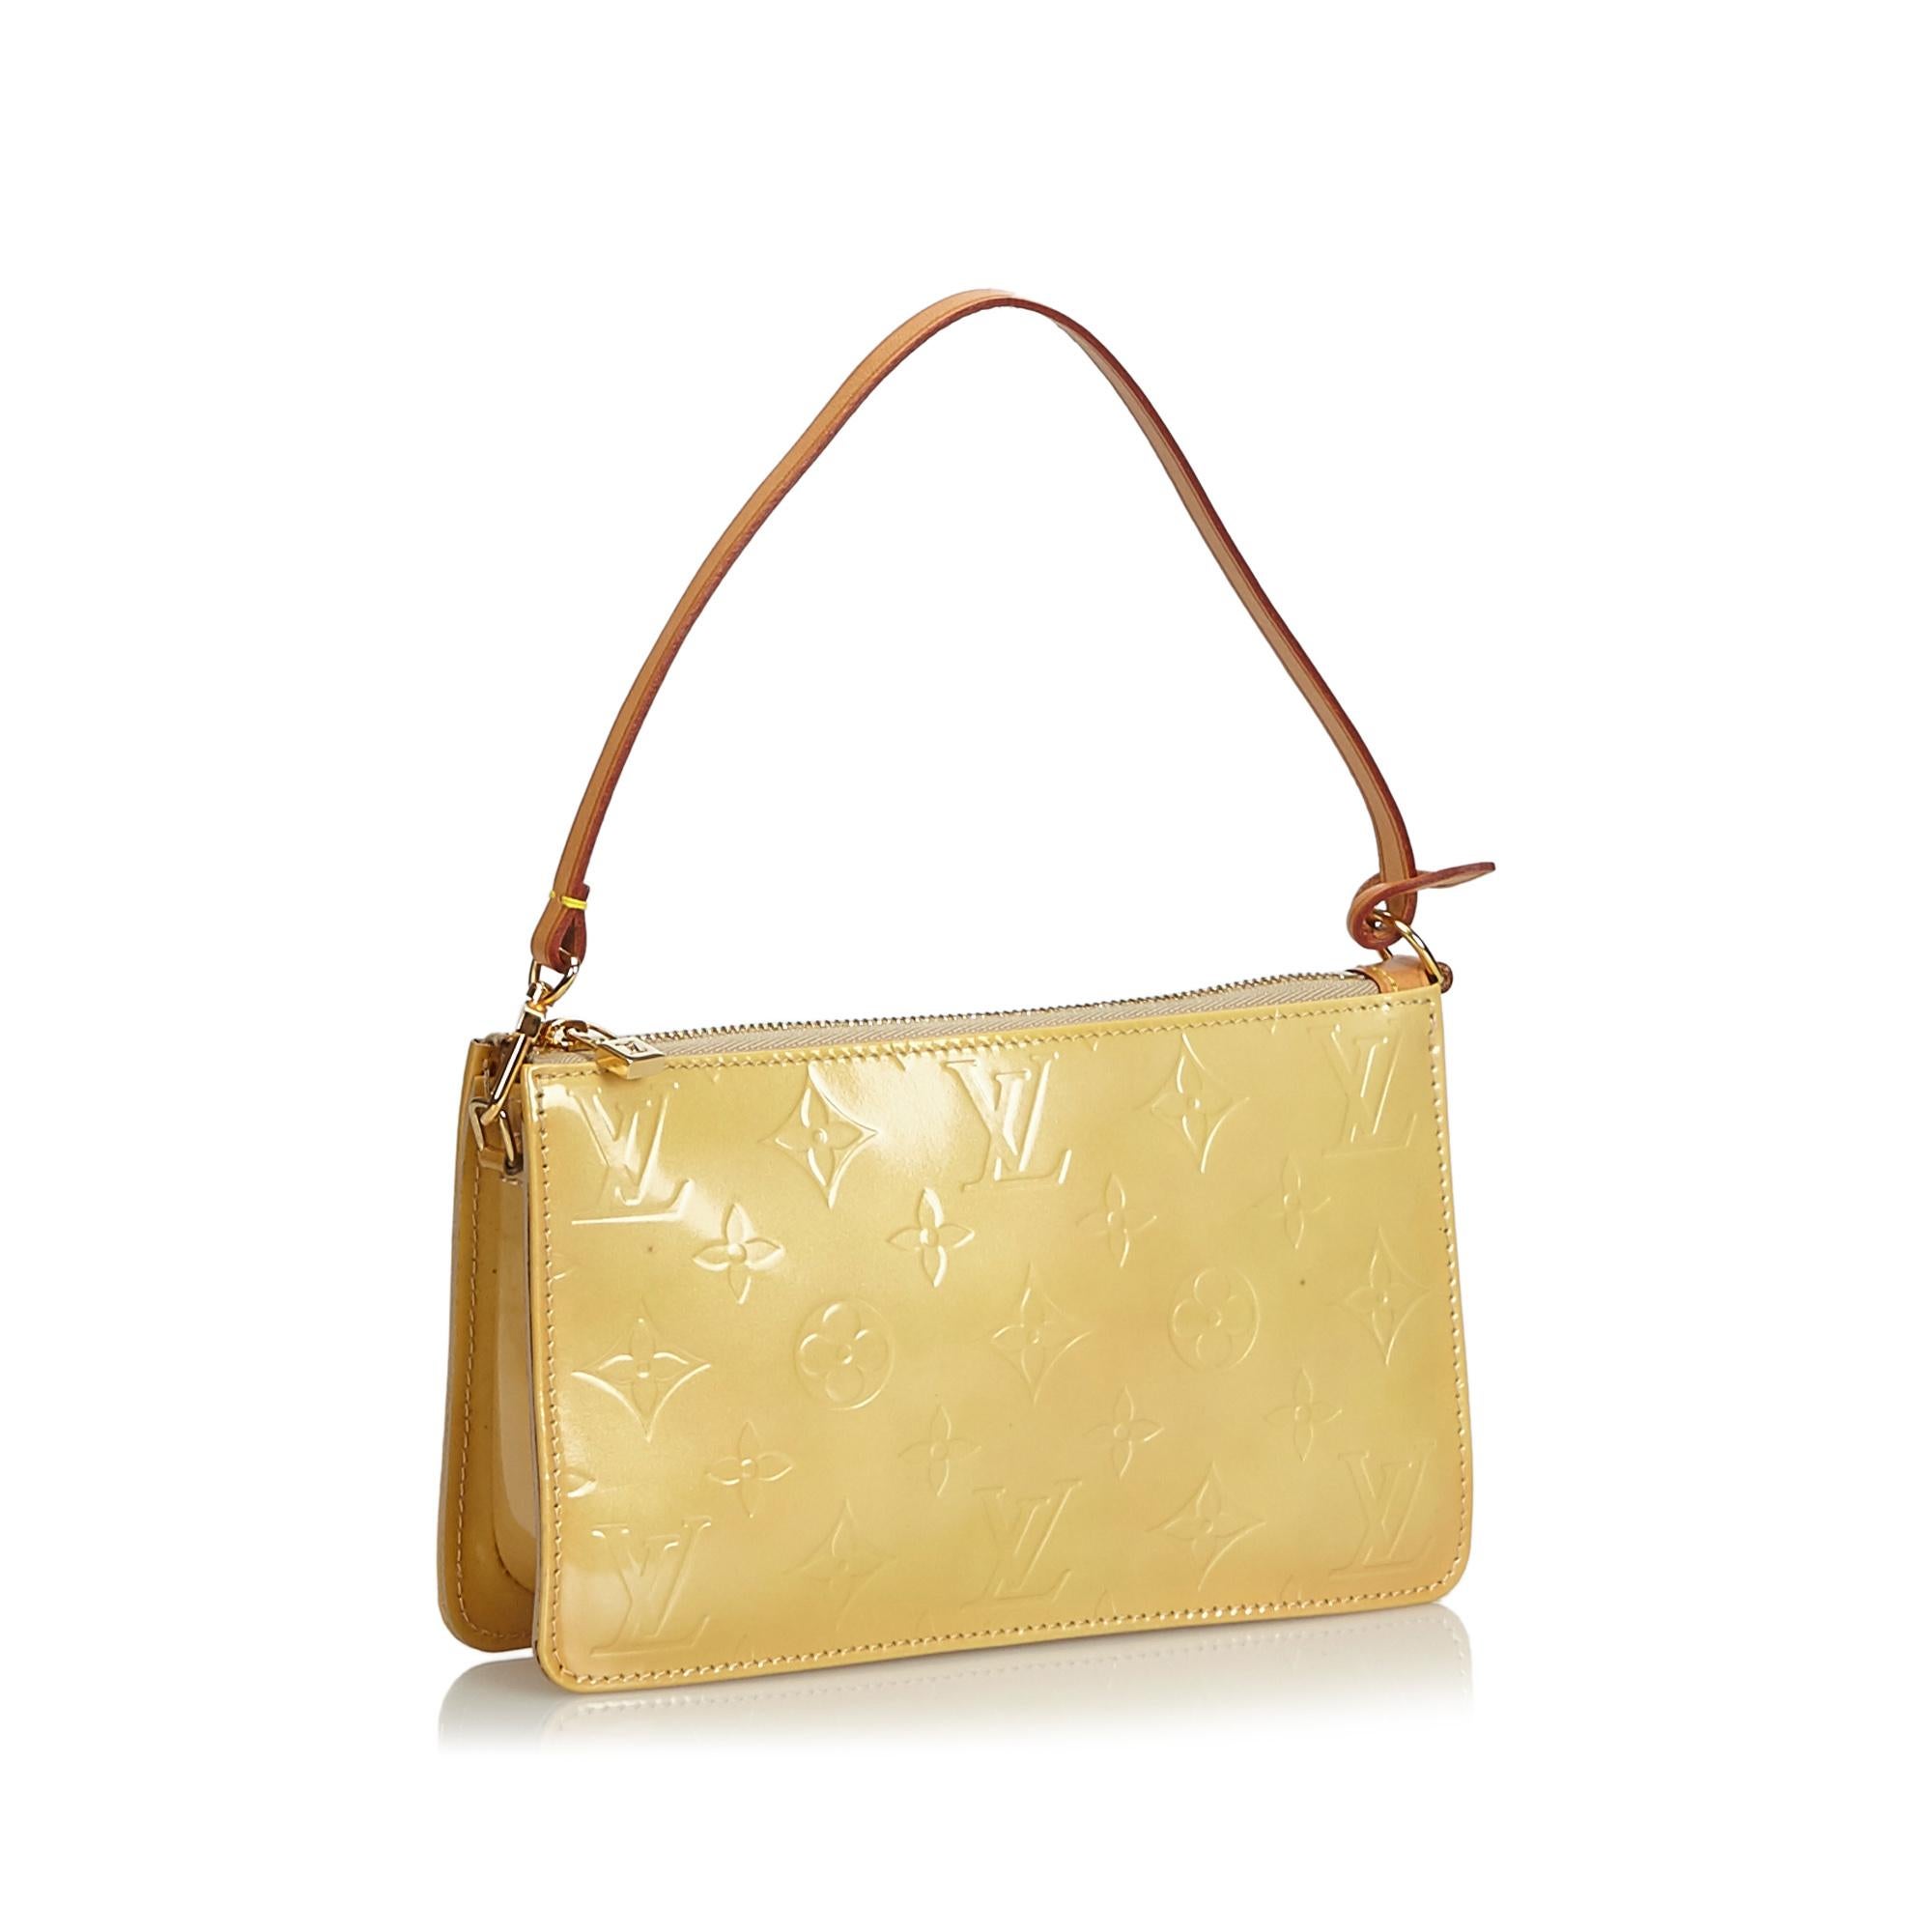 The Lexington features a vernis leather body, a flat leather strap, and a top zip closure. It carries as B+ condition rating.

Inclusions: 
This item does not come with inclusions.


Louis Vuitton pieces do not come with an authenticity card�please